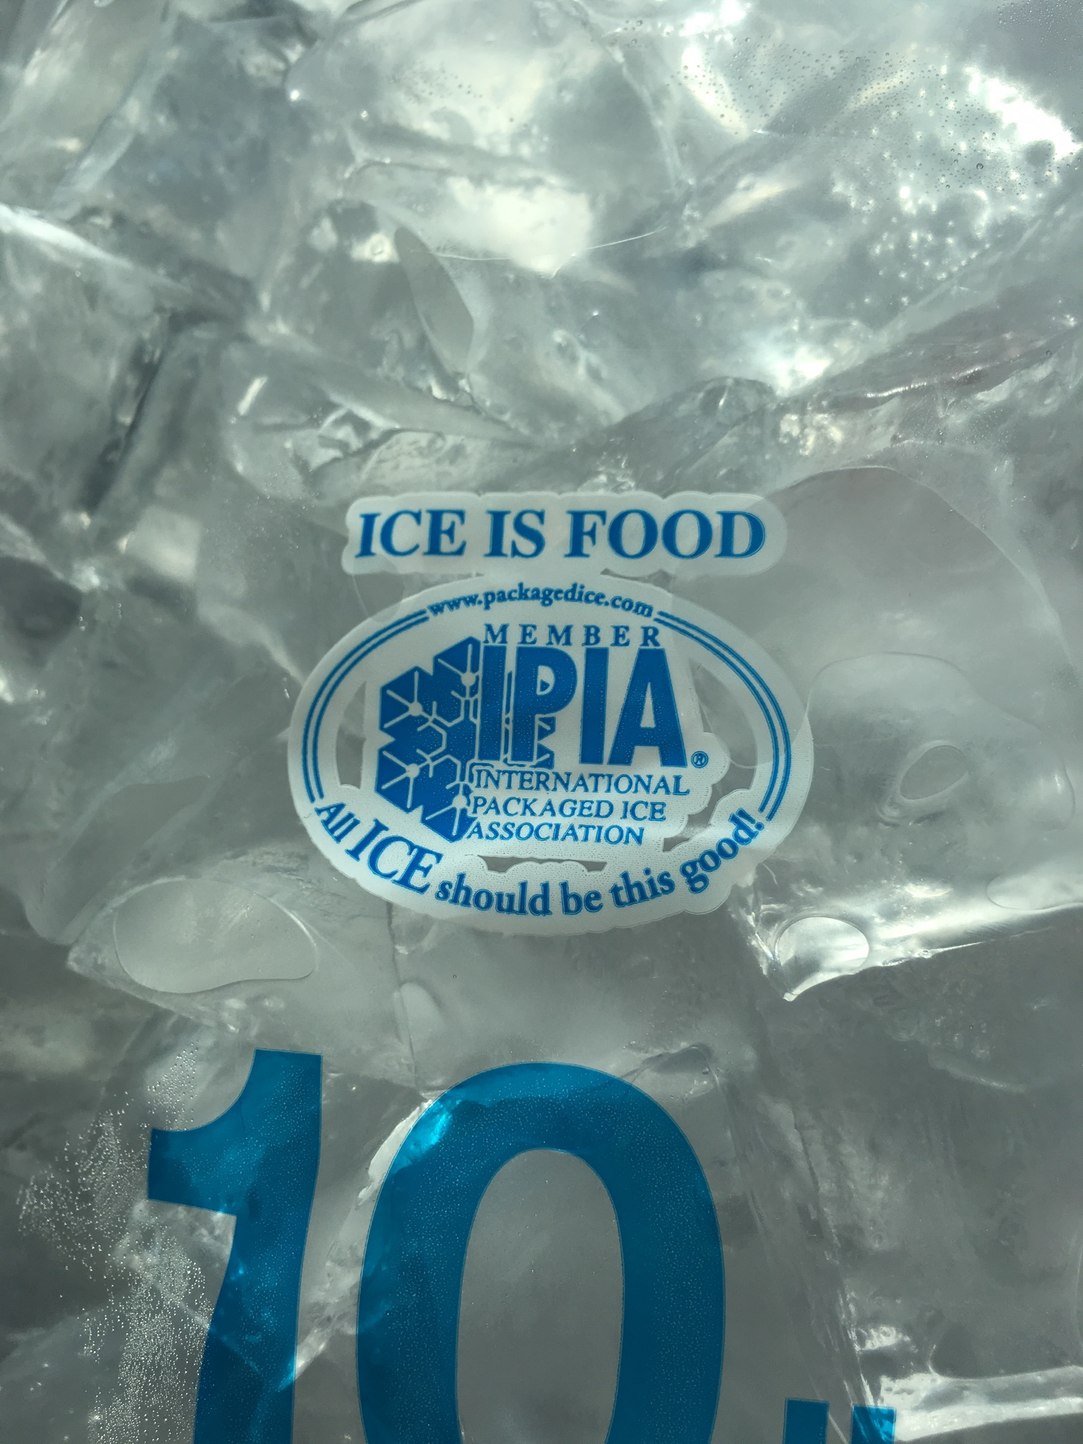 Ice is food now apparently - meme